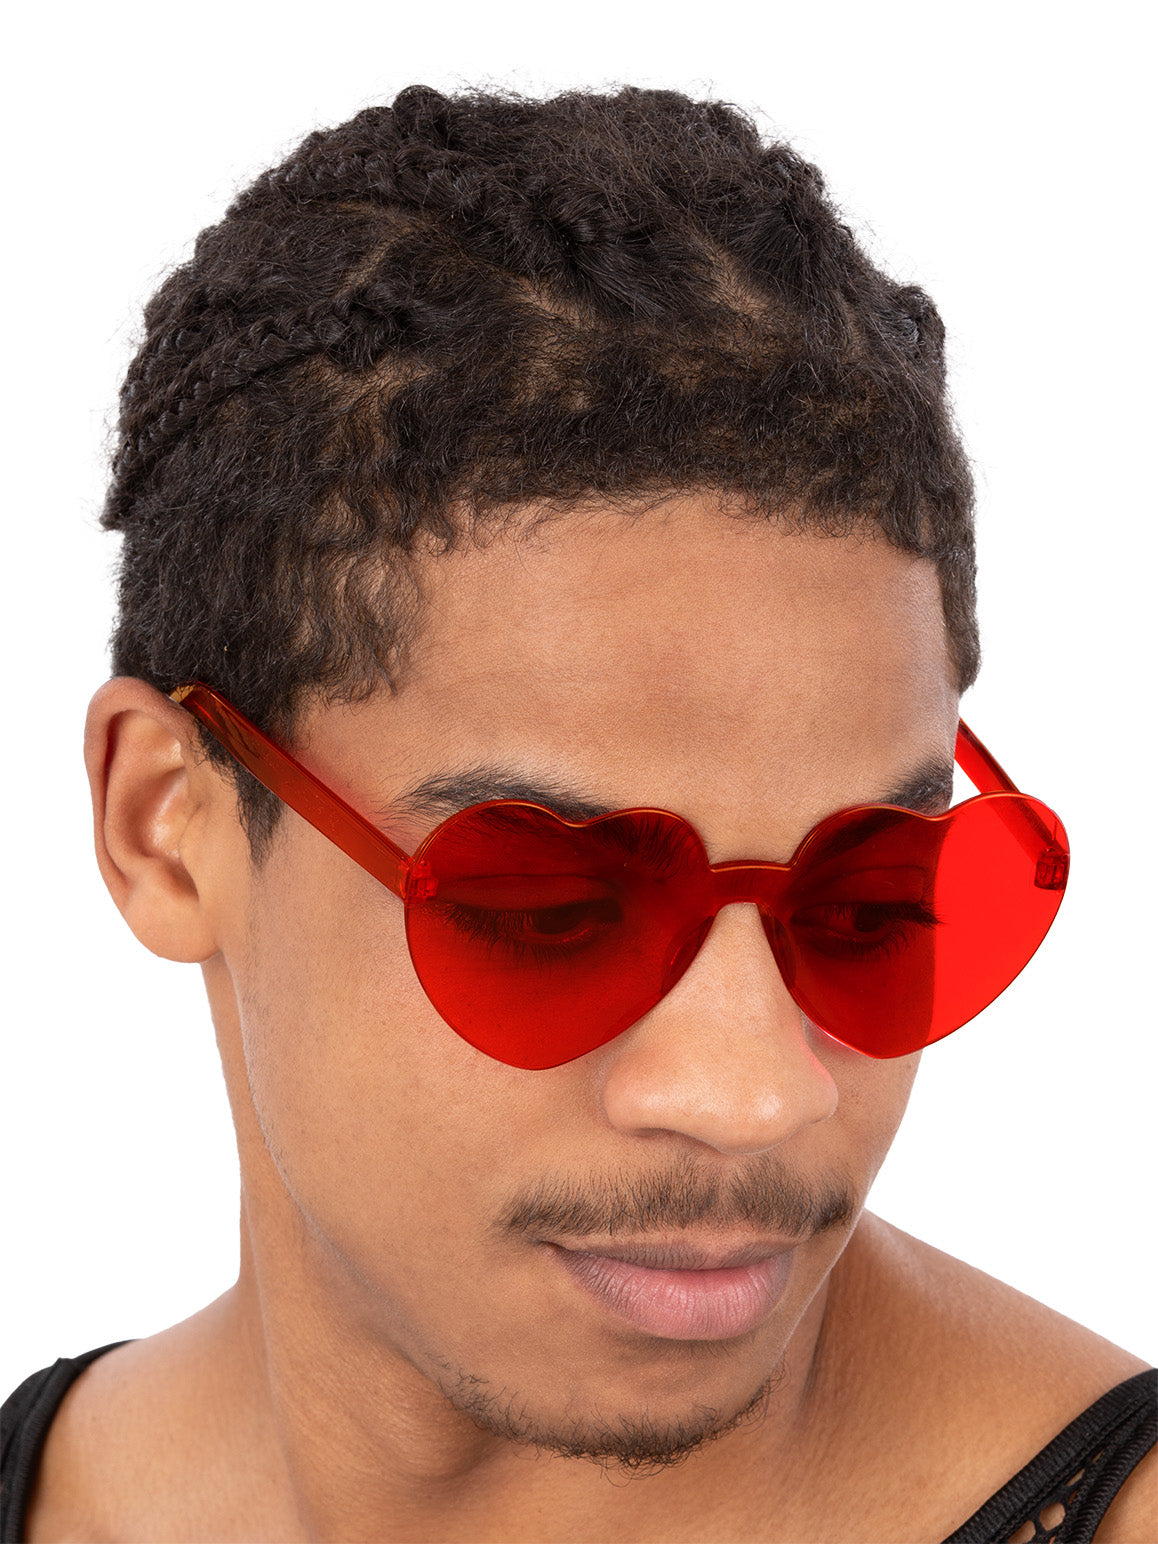 Red Heart Specs Wholesale